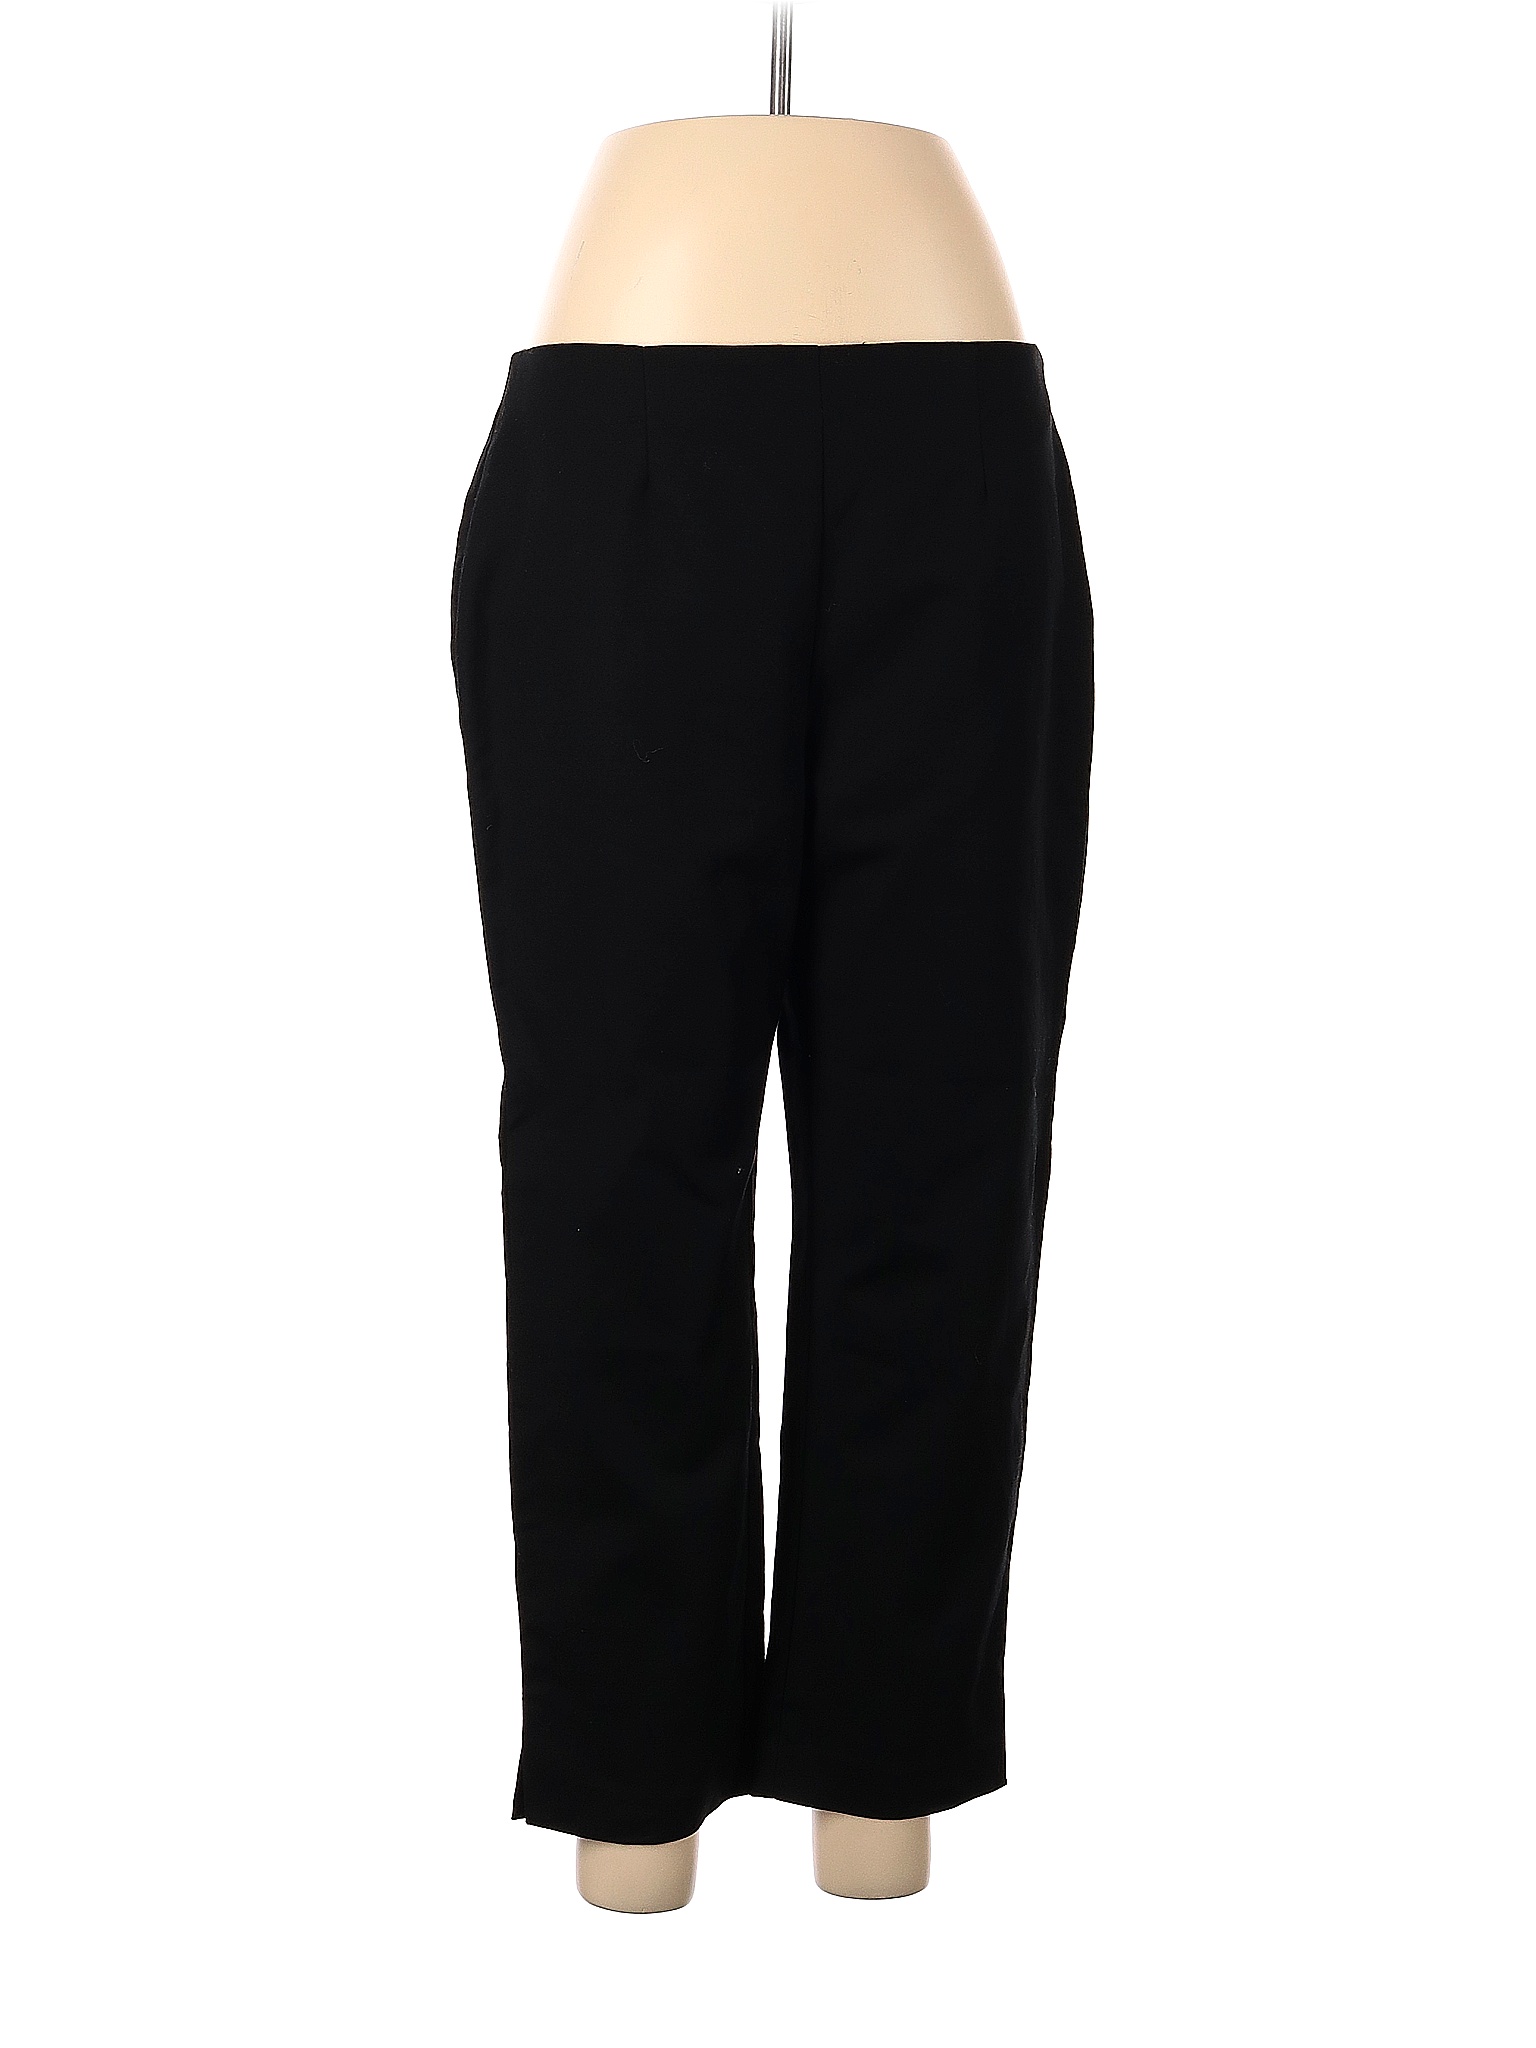 So Slimming by Chico's Solid Black Casual Pants Size Med (1.5) - 86% ...